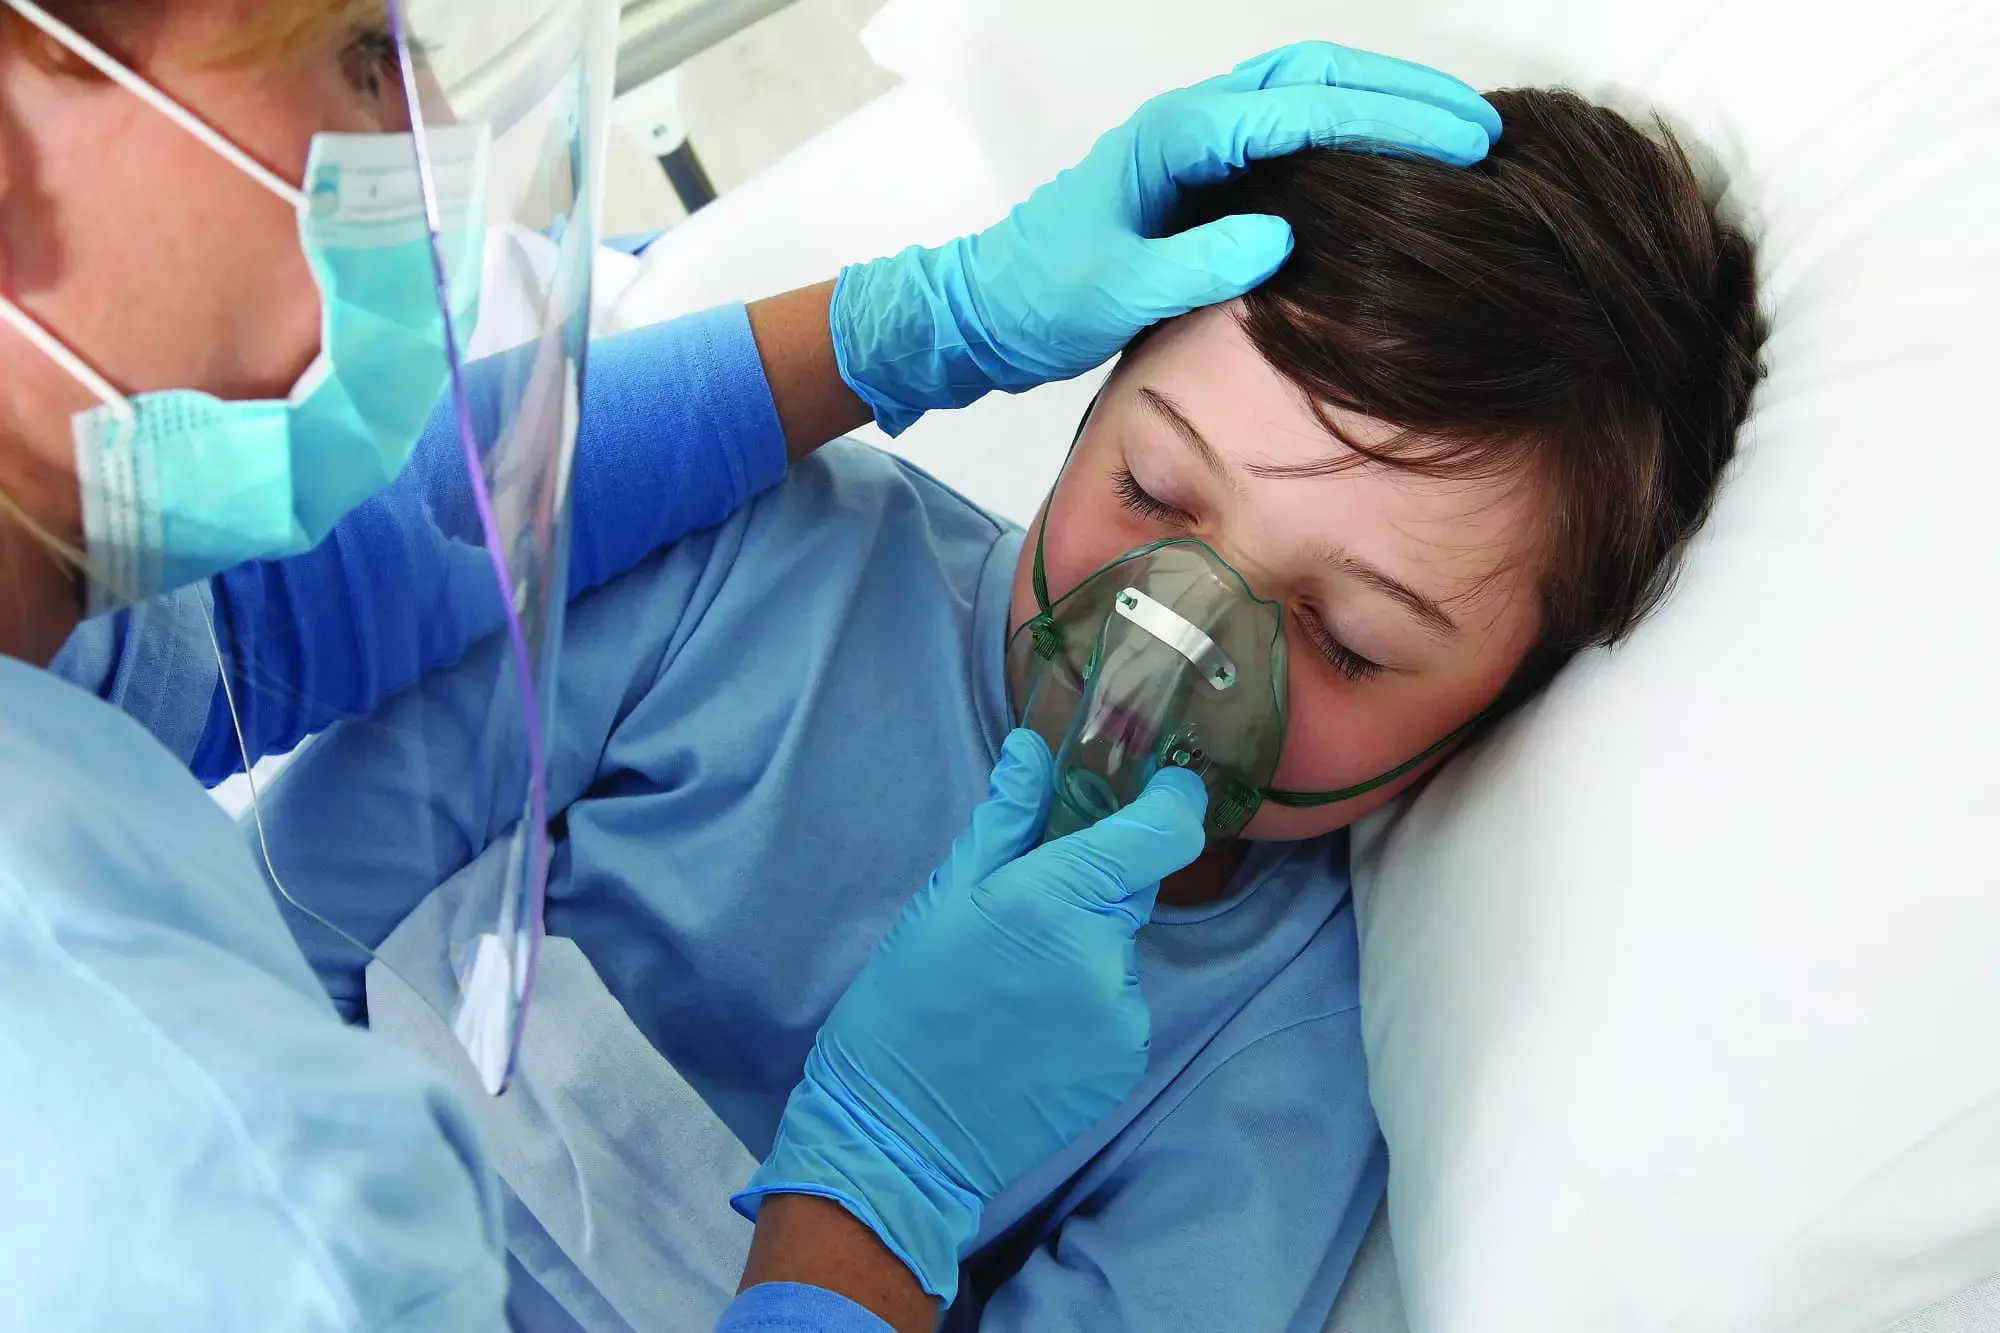 Reduced HFNC oxygen therapy among kids with bronchiolitis tied to shorter length of hospital stay